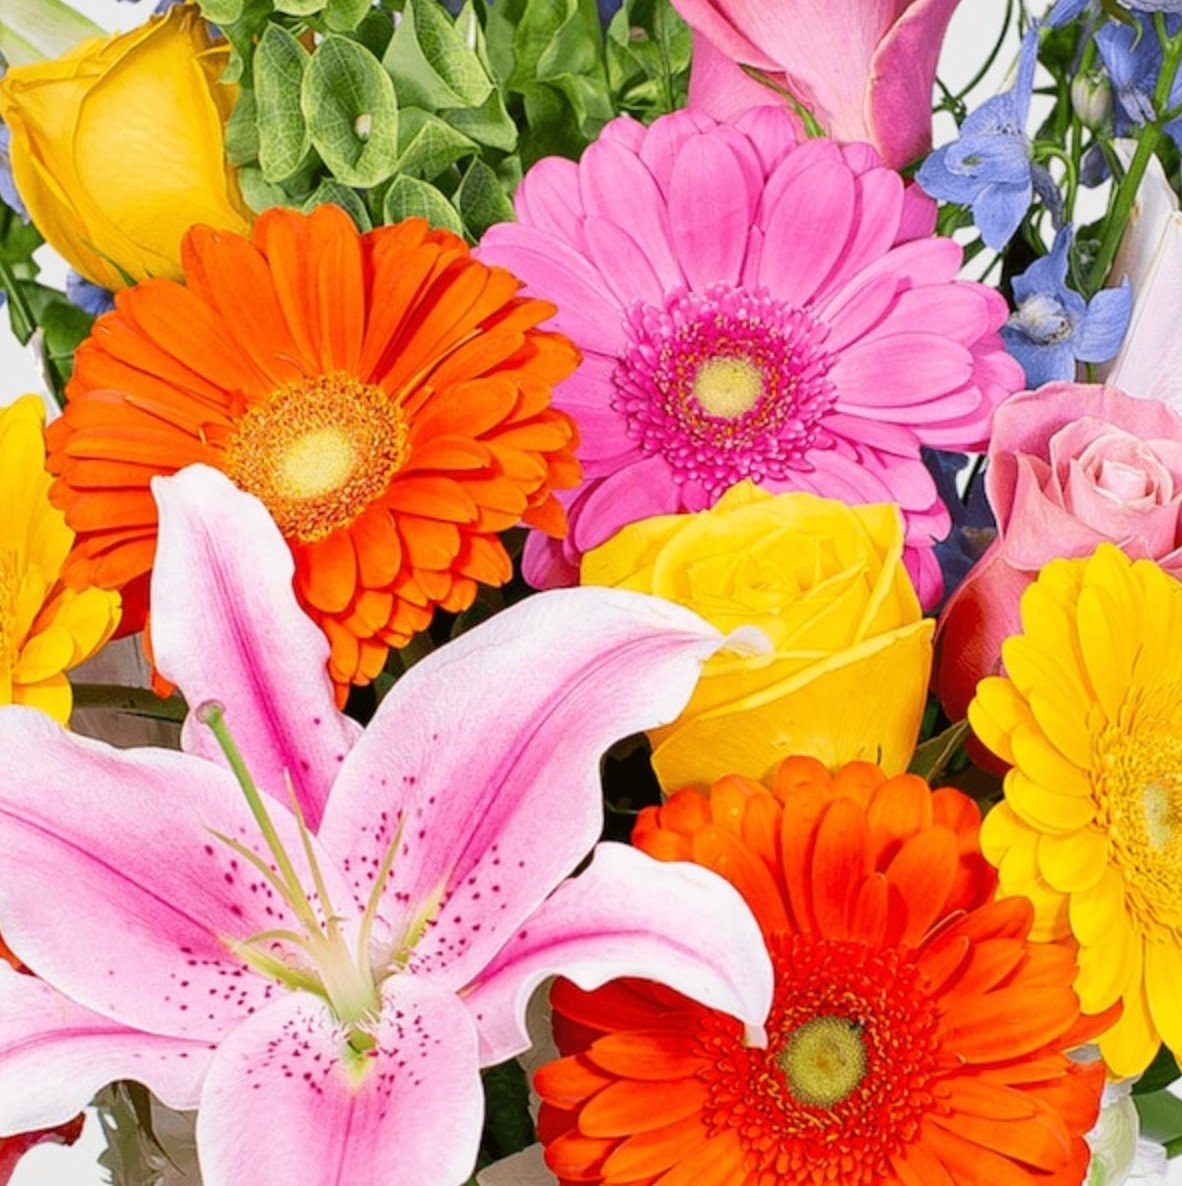 In search of gorgeous flower arrangements to delight Mom this Mother's Day? Swing by Herron House Flowers or browse online for their stunning bouquets and thoughtful gifts. Plus, they offer delivery straight to your doorstep! They are located at 18 W